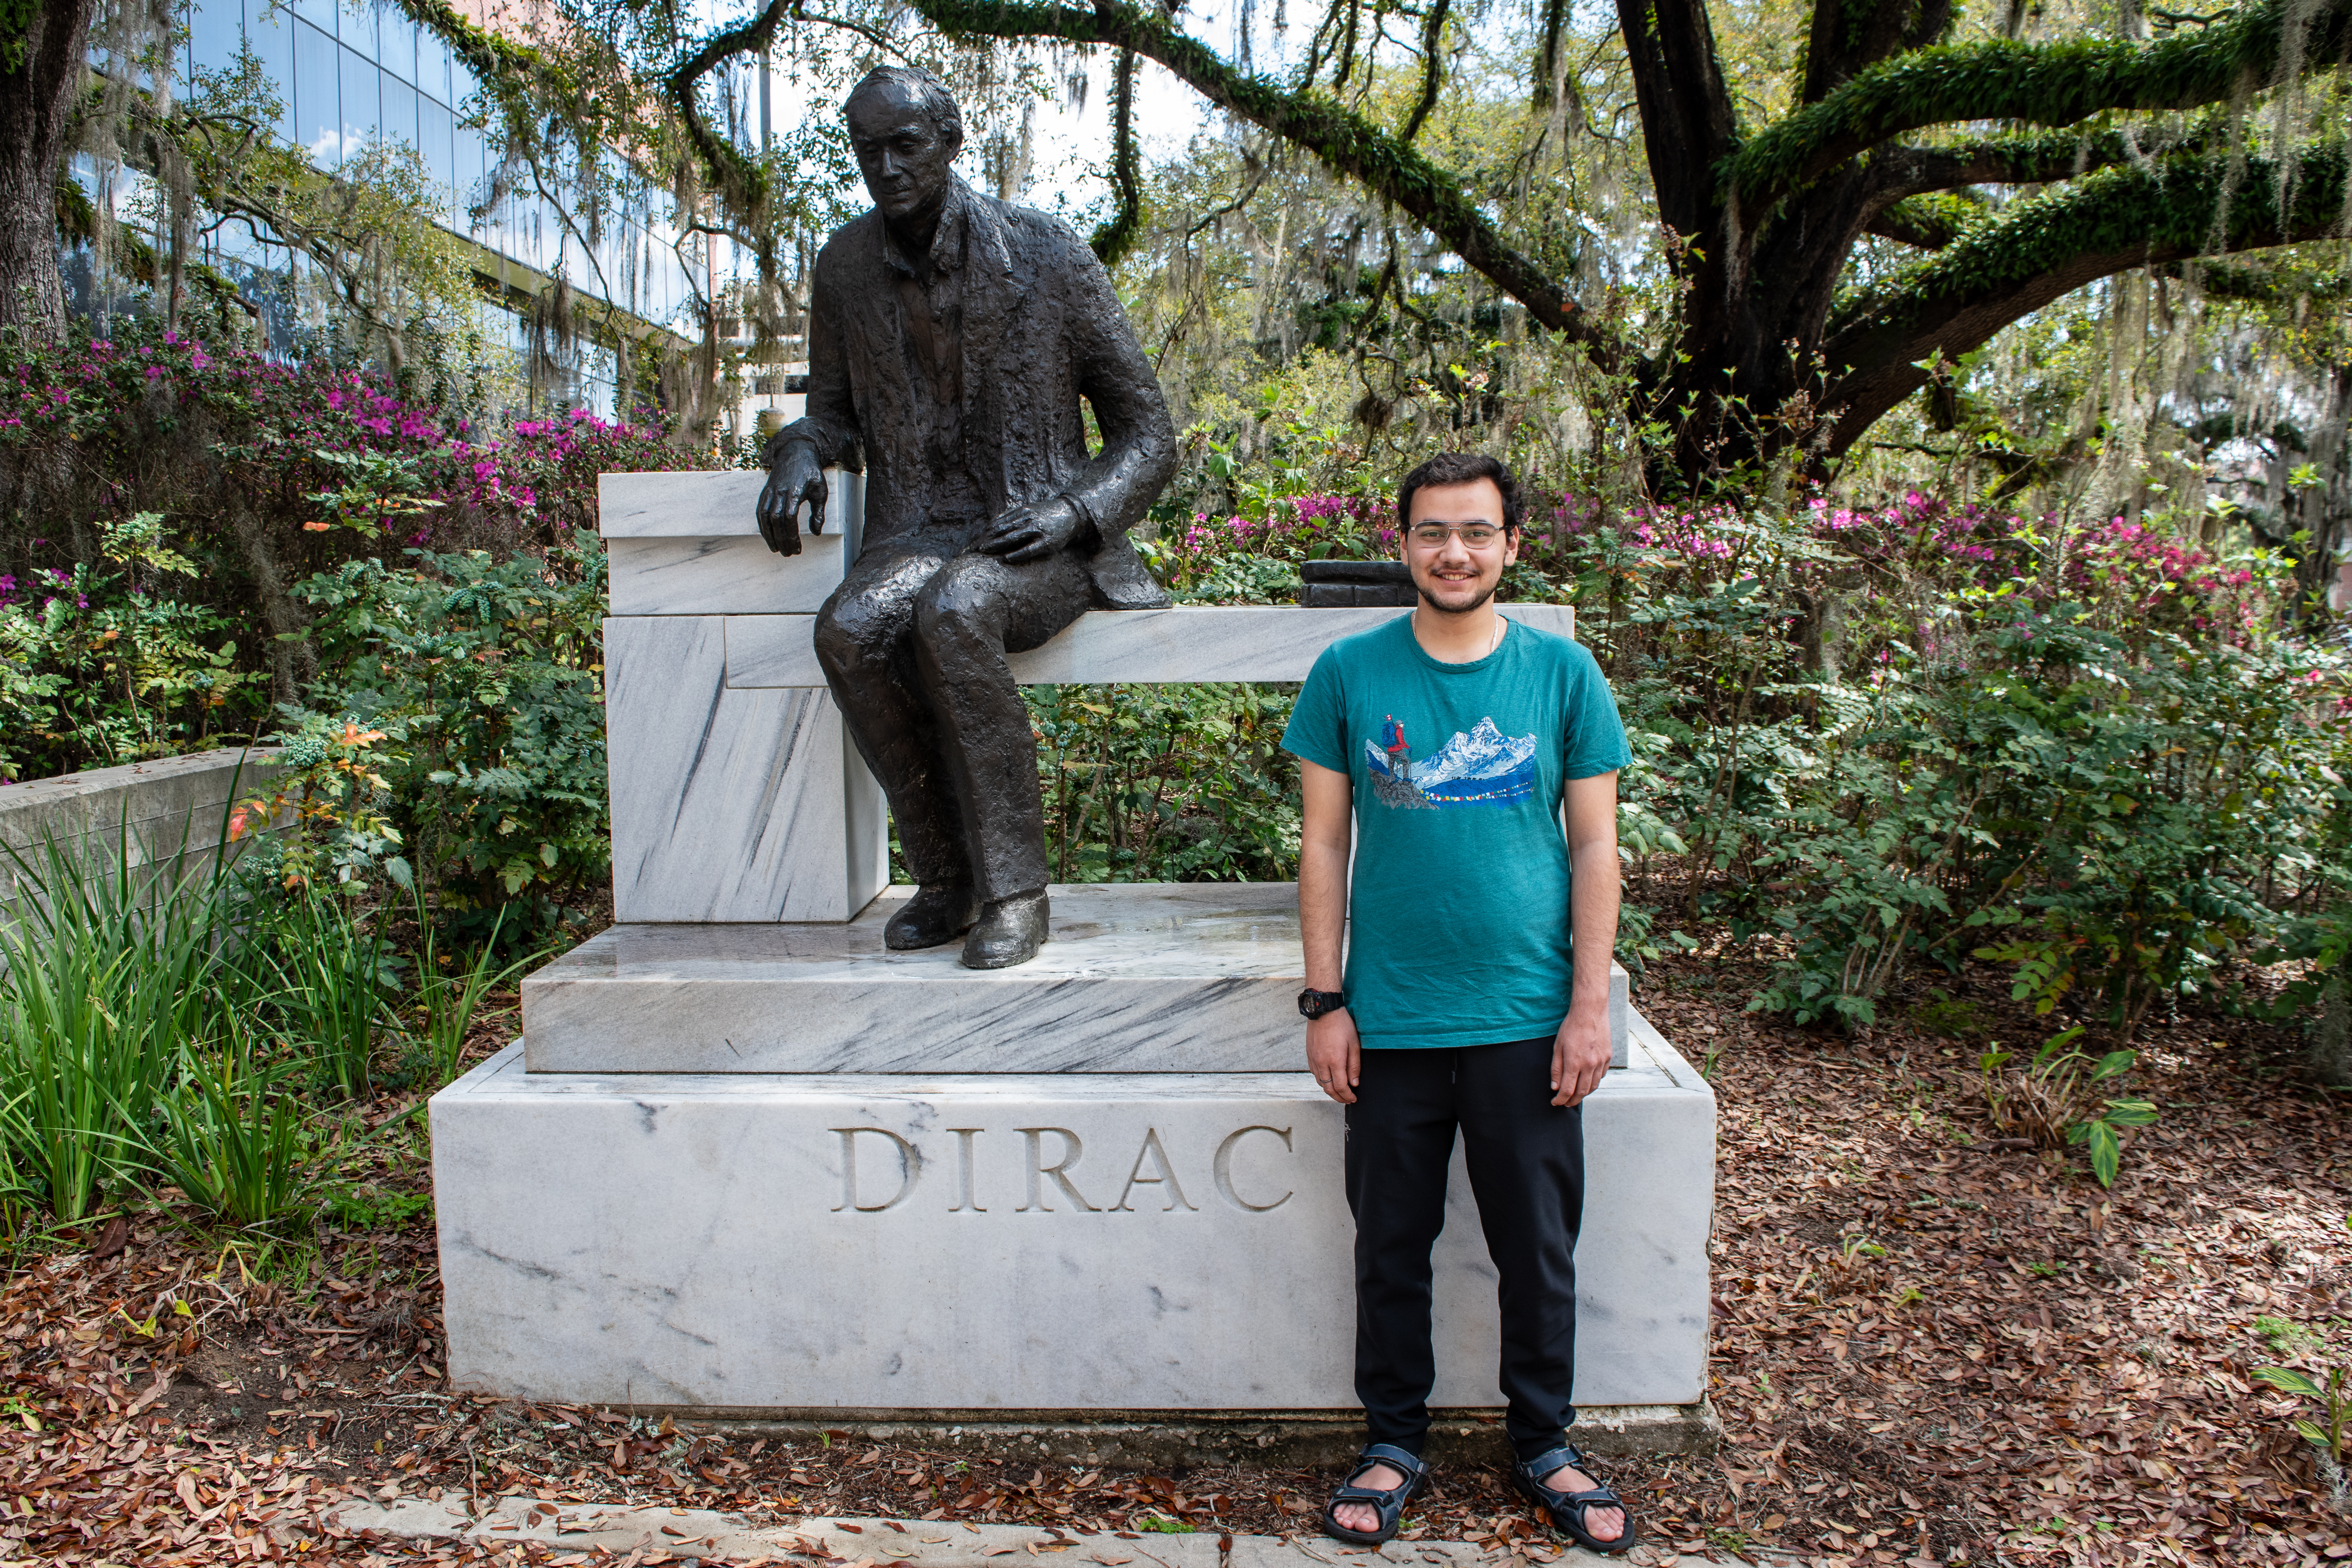 From Nepal to Florida State University: How the Legacy of Paul Dirac Helped a Student in Nepal Discover Florida State